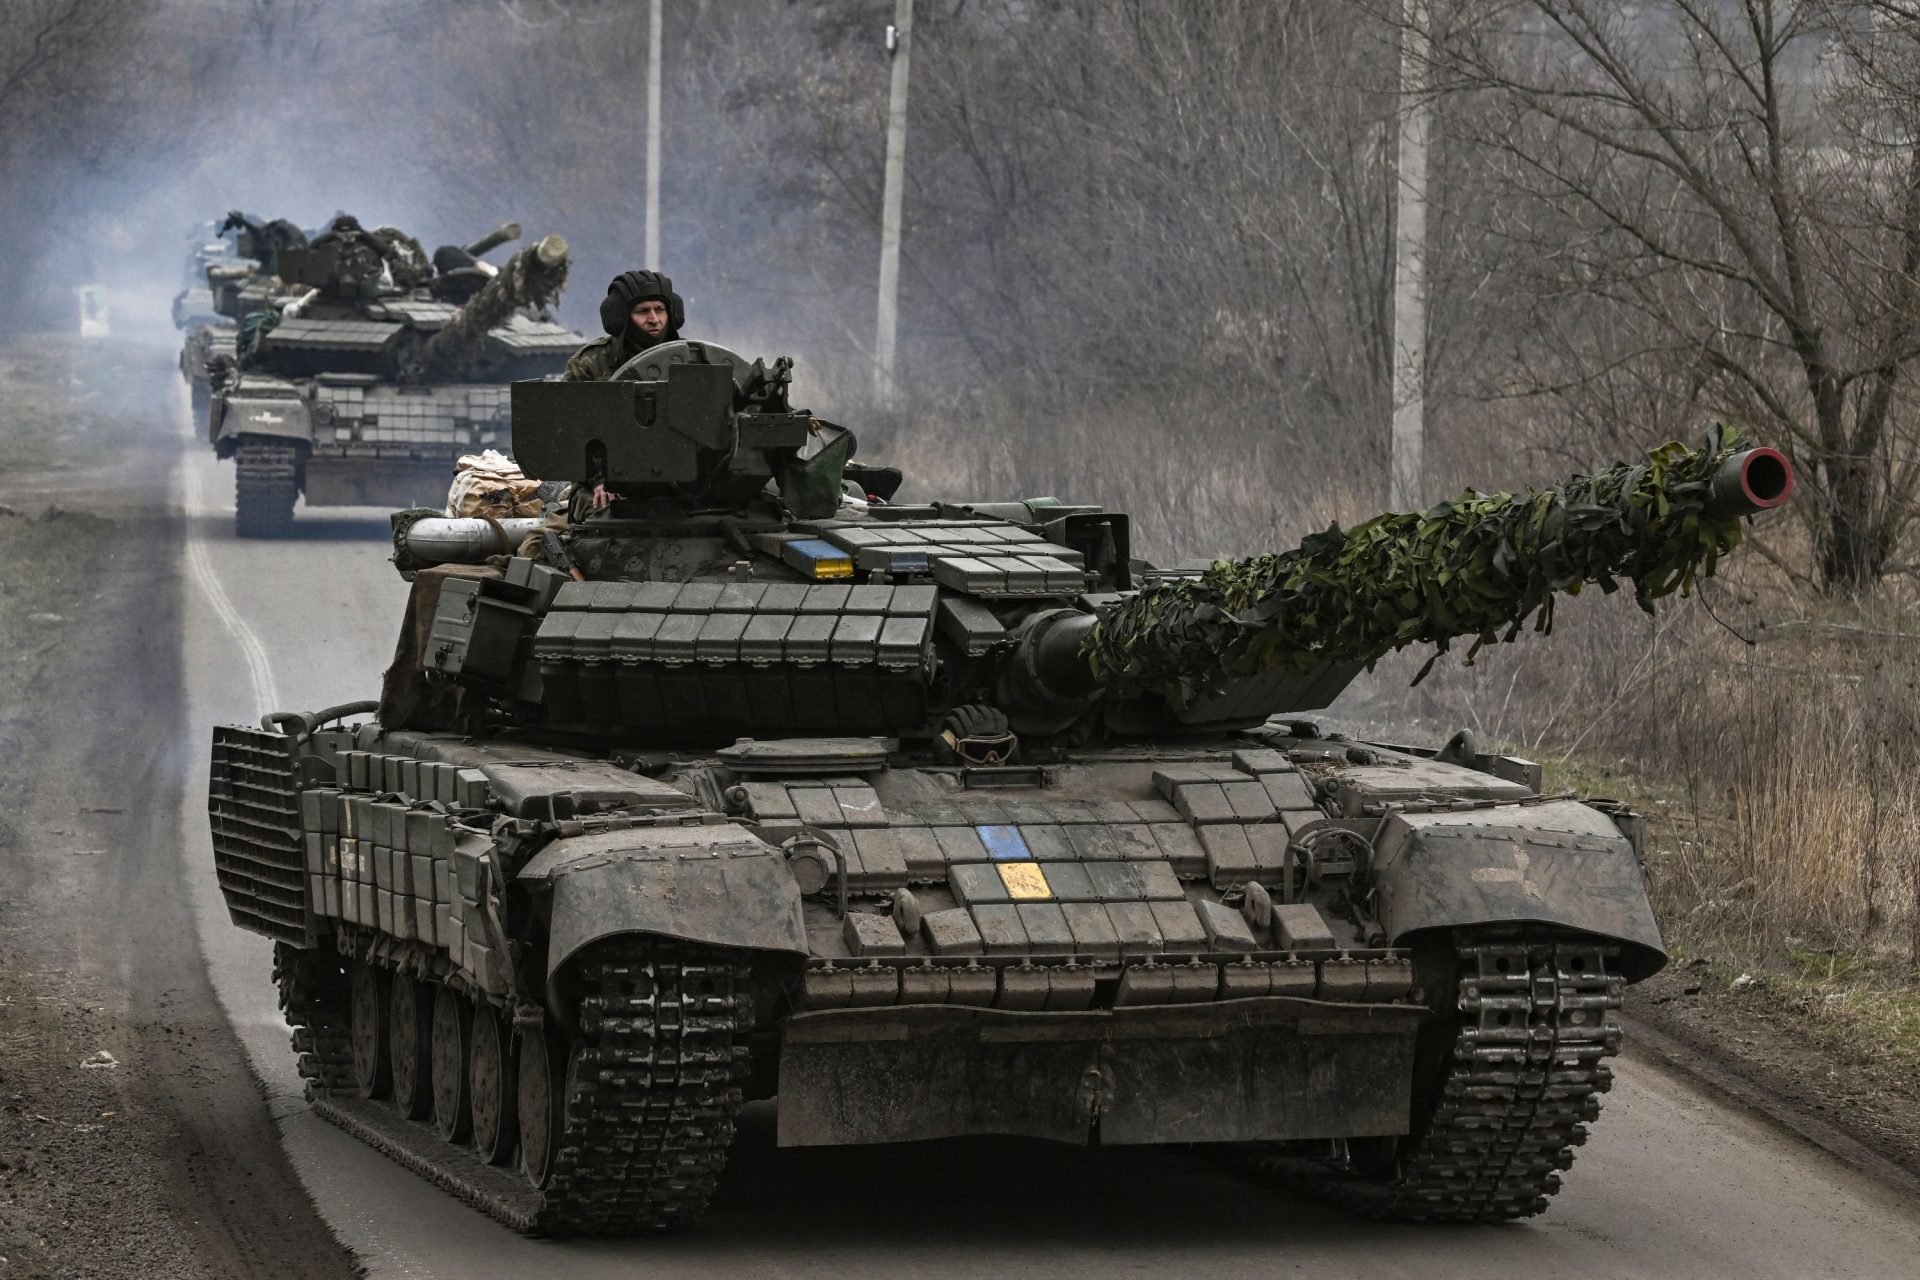 A defeated Ukraine could see NATO attacked 